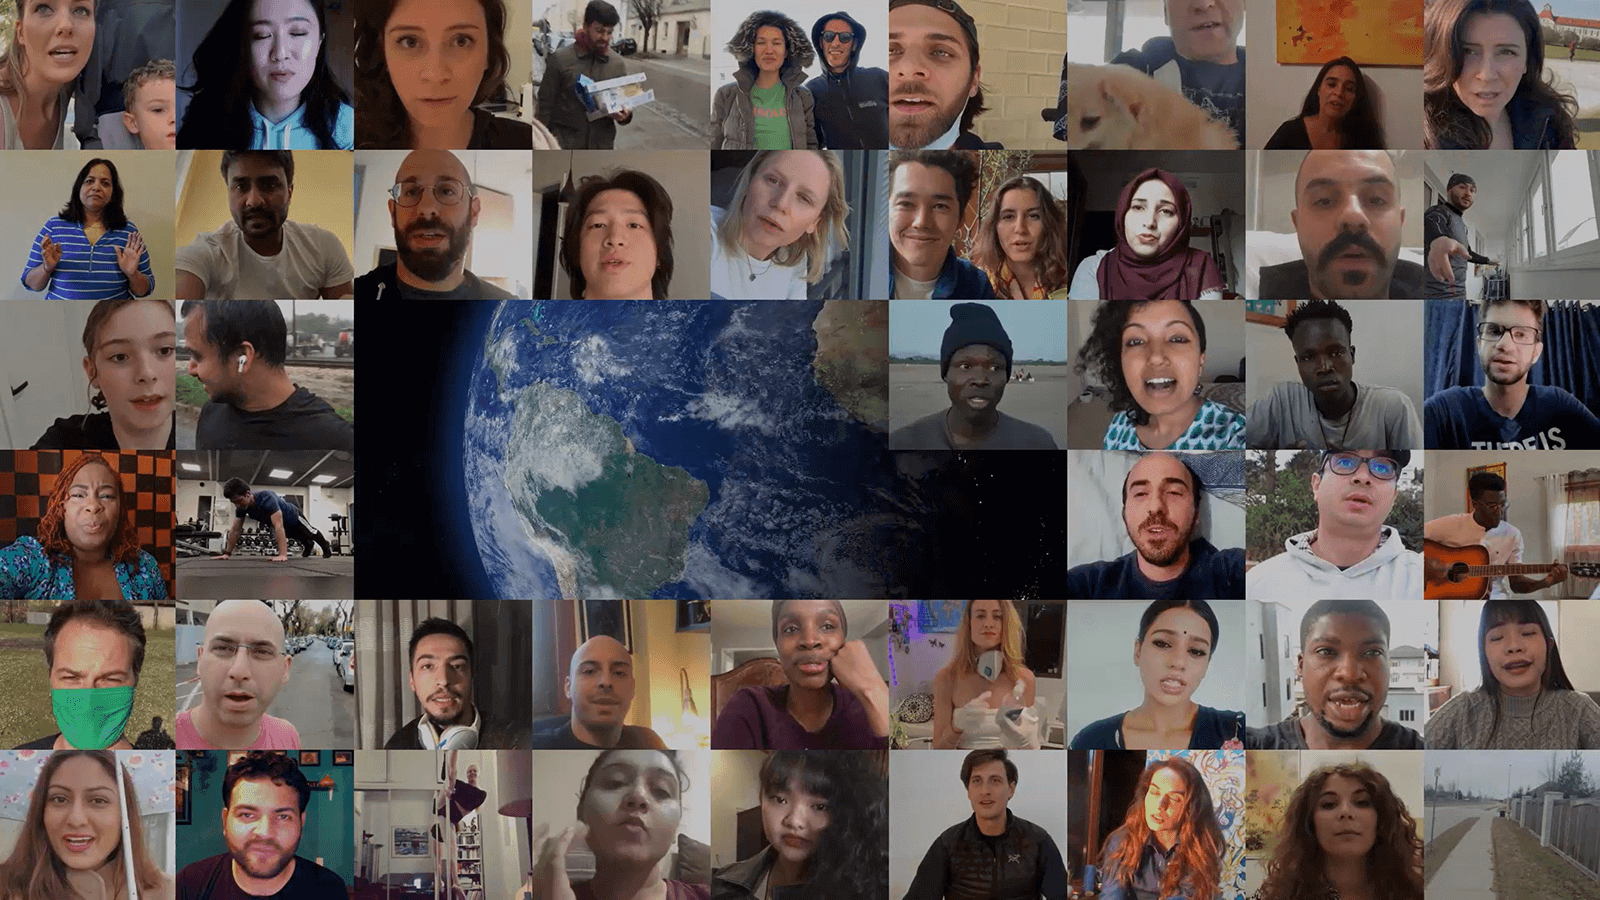 Bringing The World Together: "Unity" Documentary & #LOVESPREADS For Global Artists Connects The World During These COVID Times